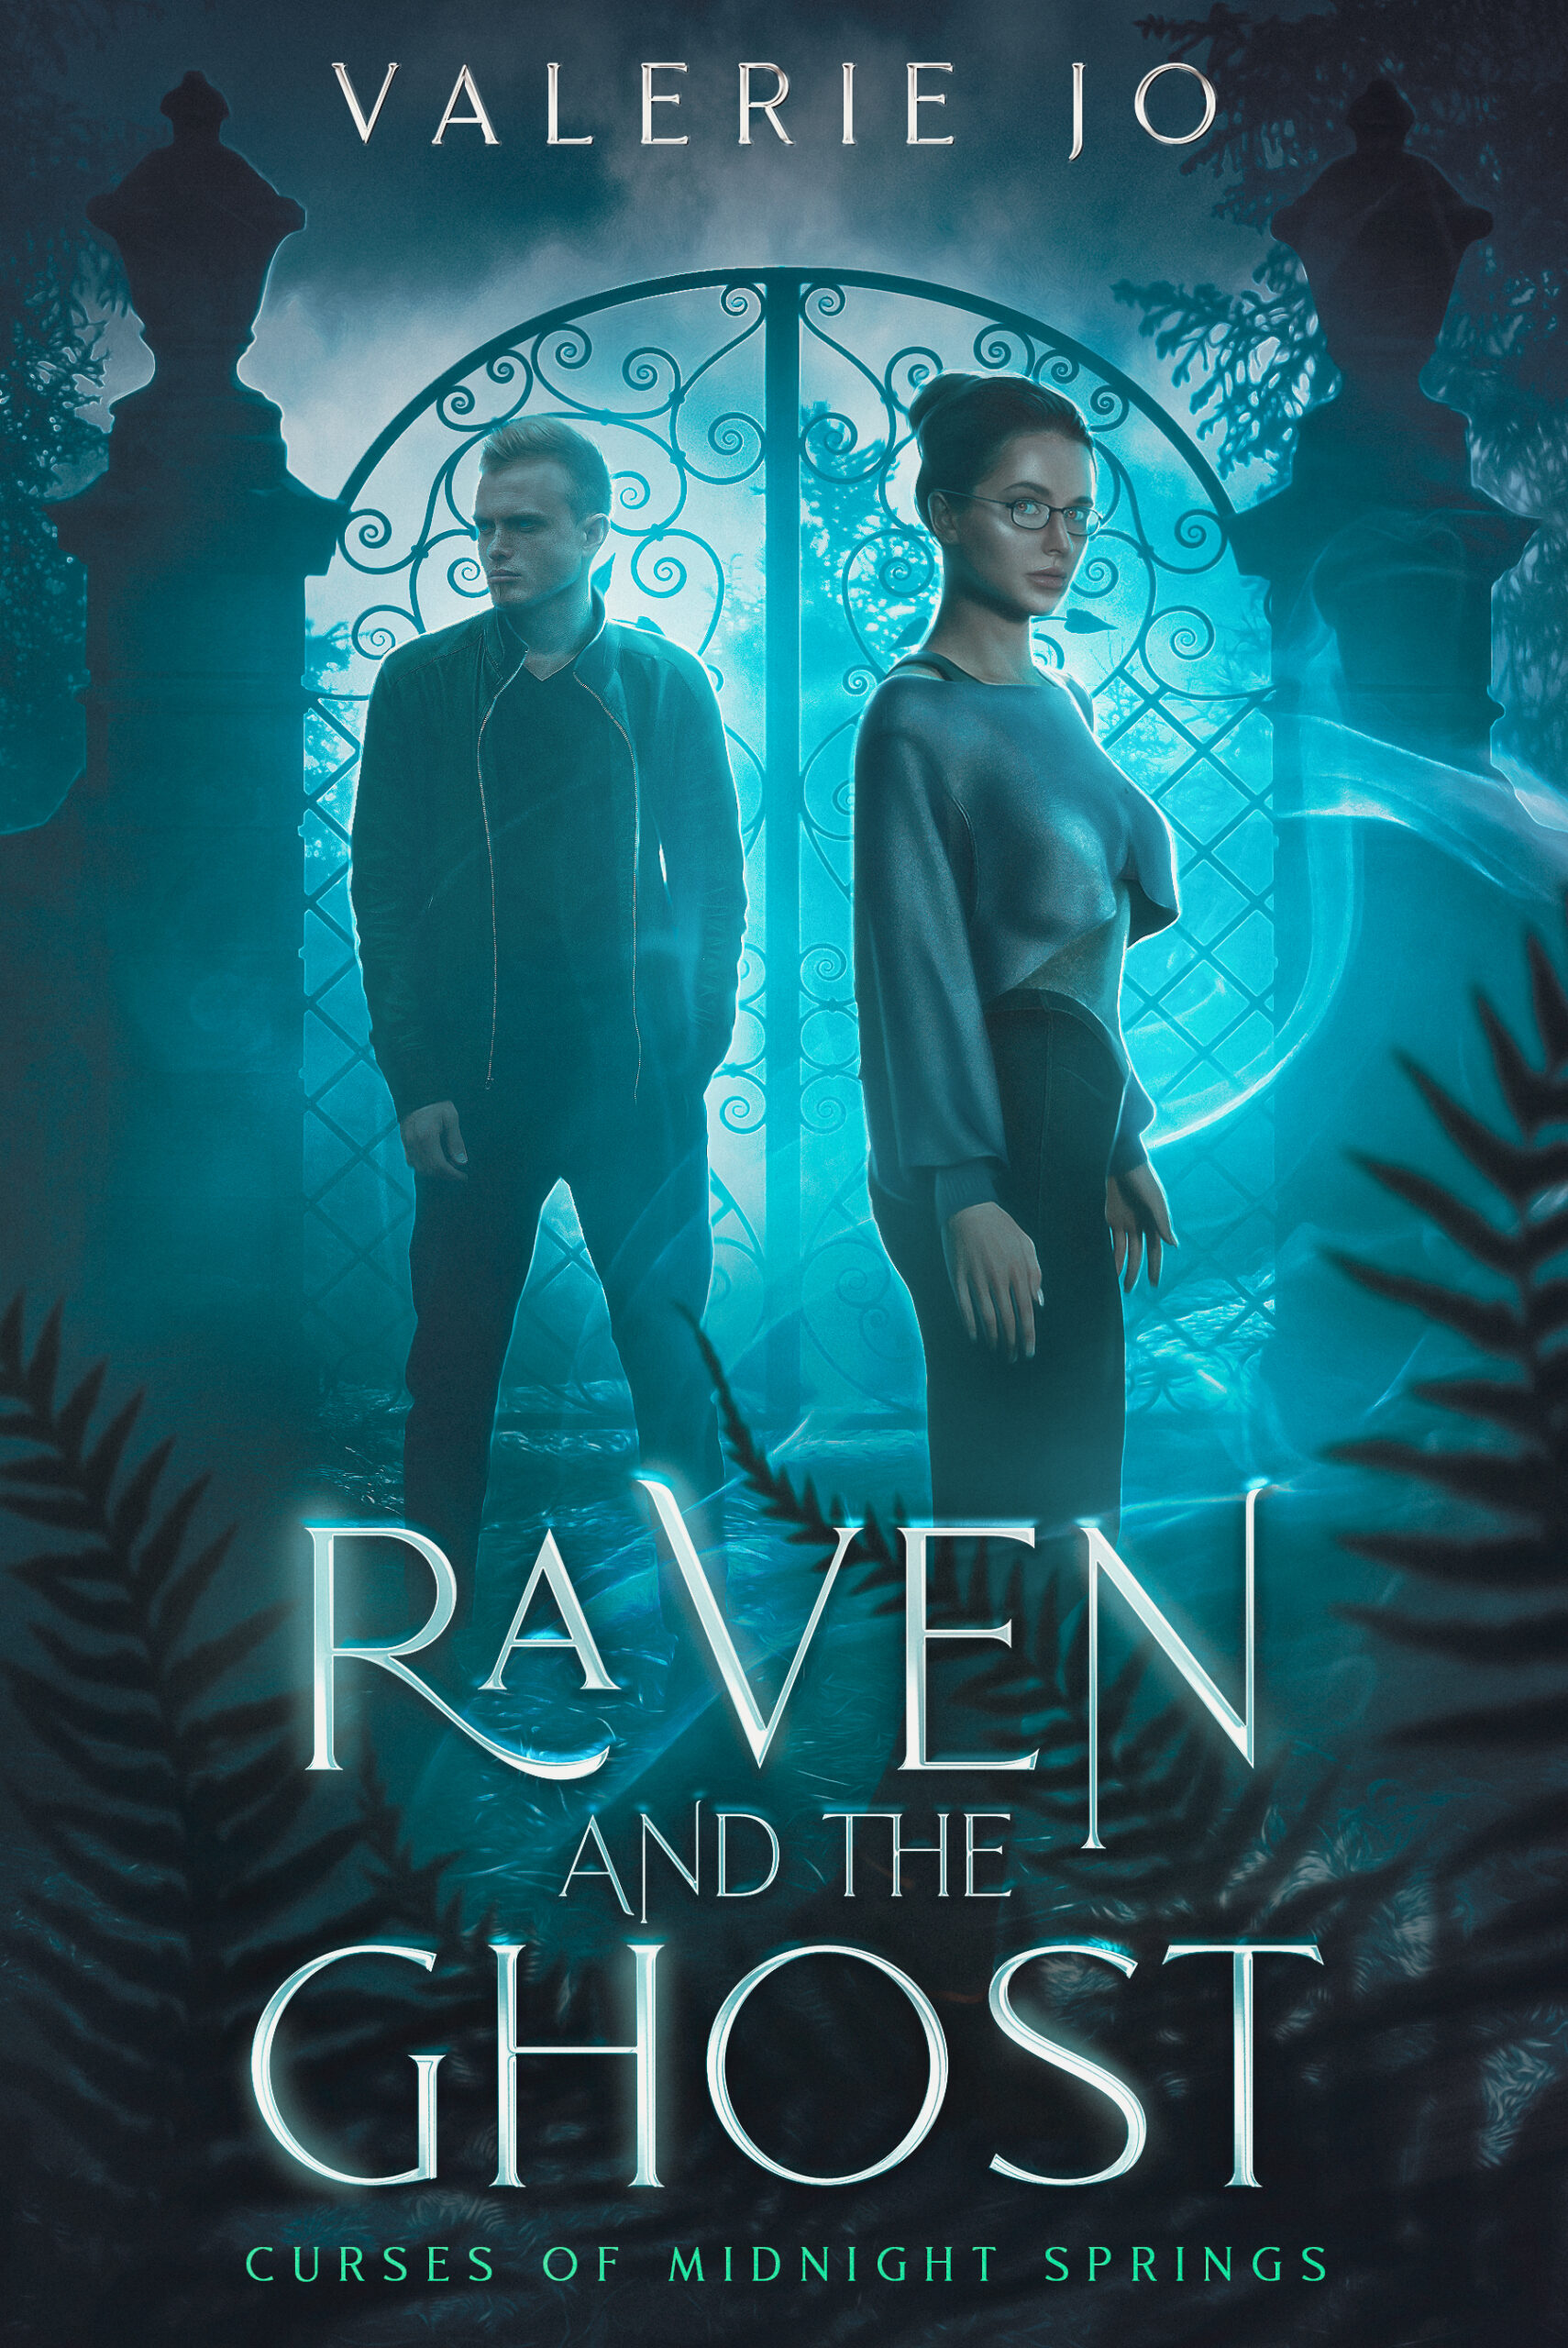 Raven and the Ghost book cover with a girl and boy standing in a foggy, moonlit area.